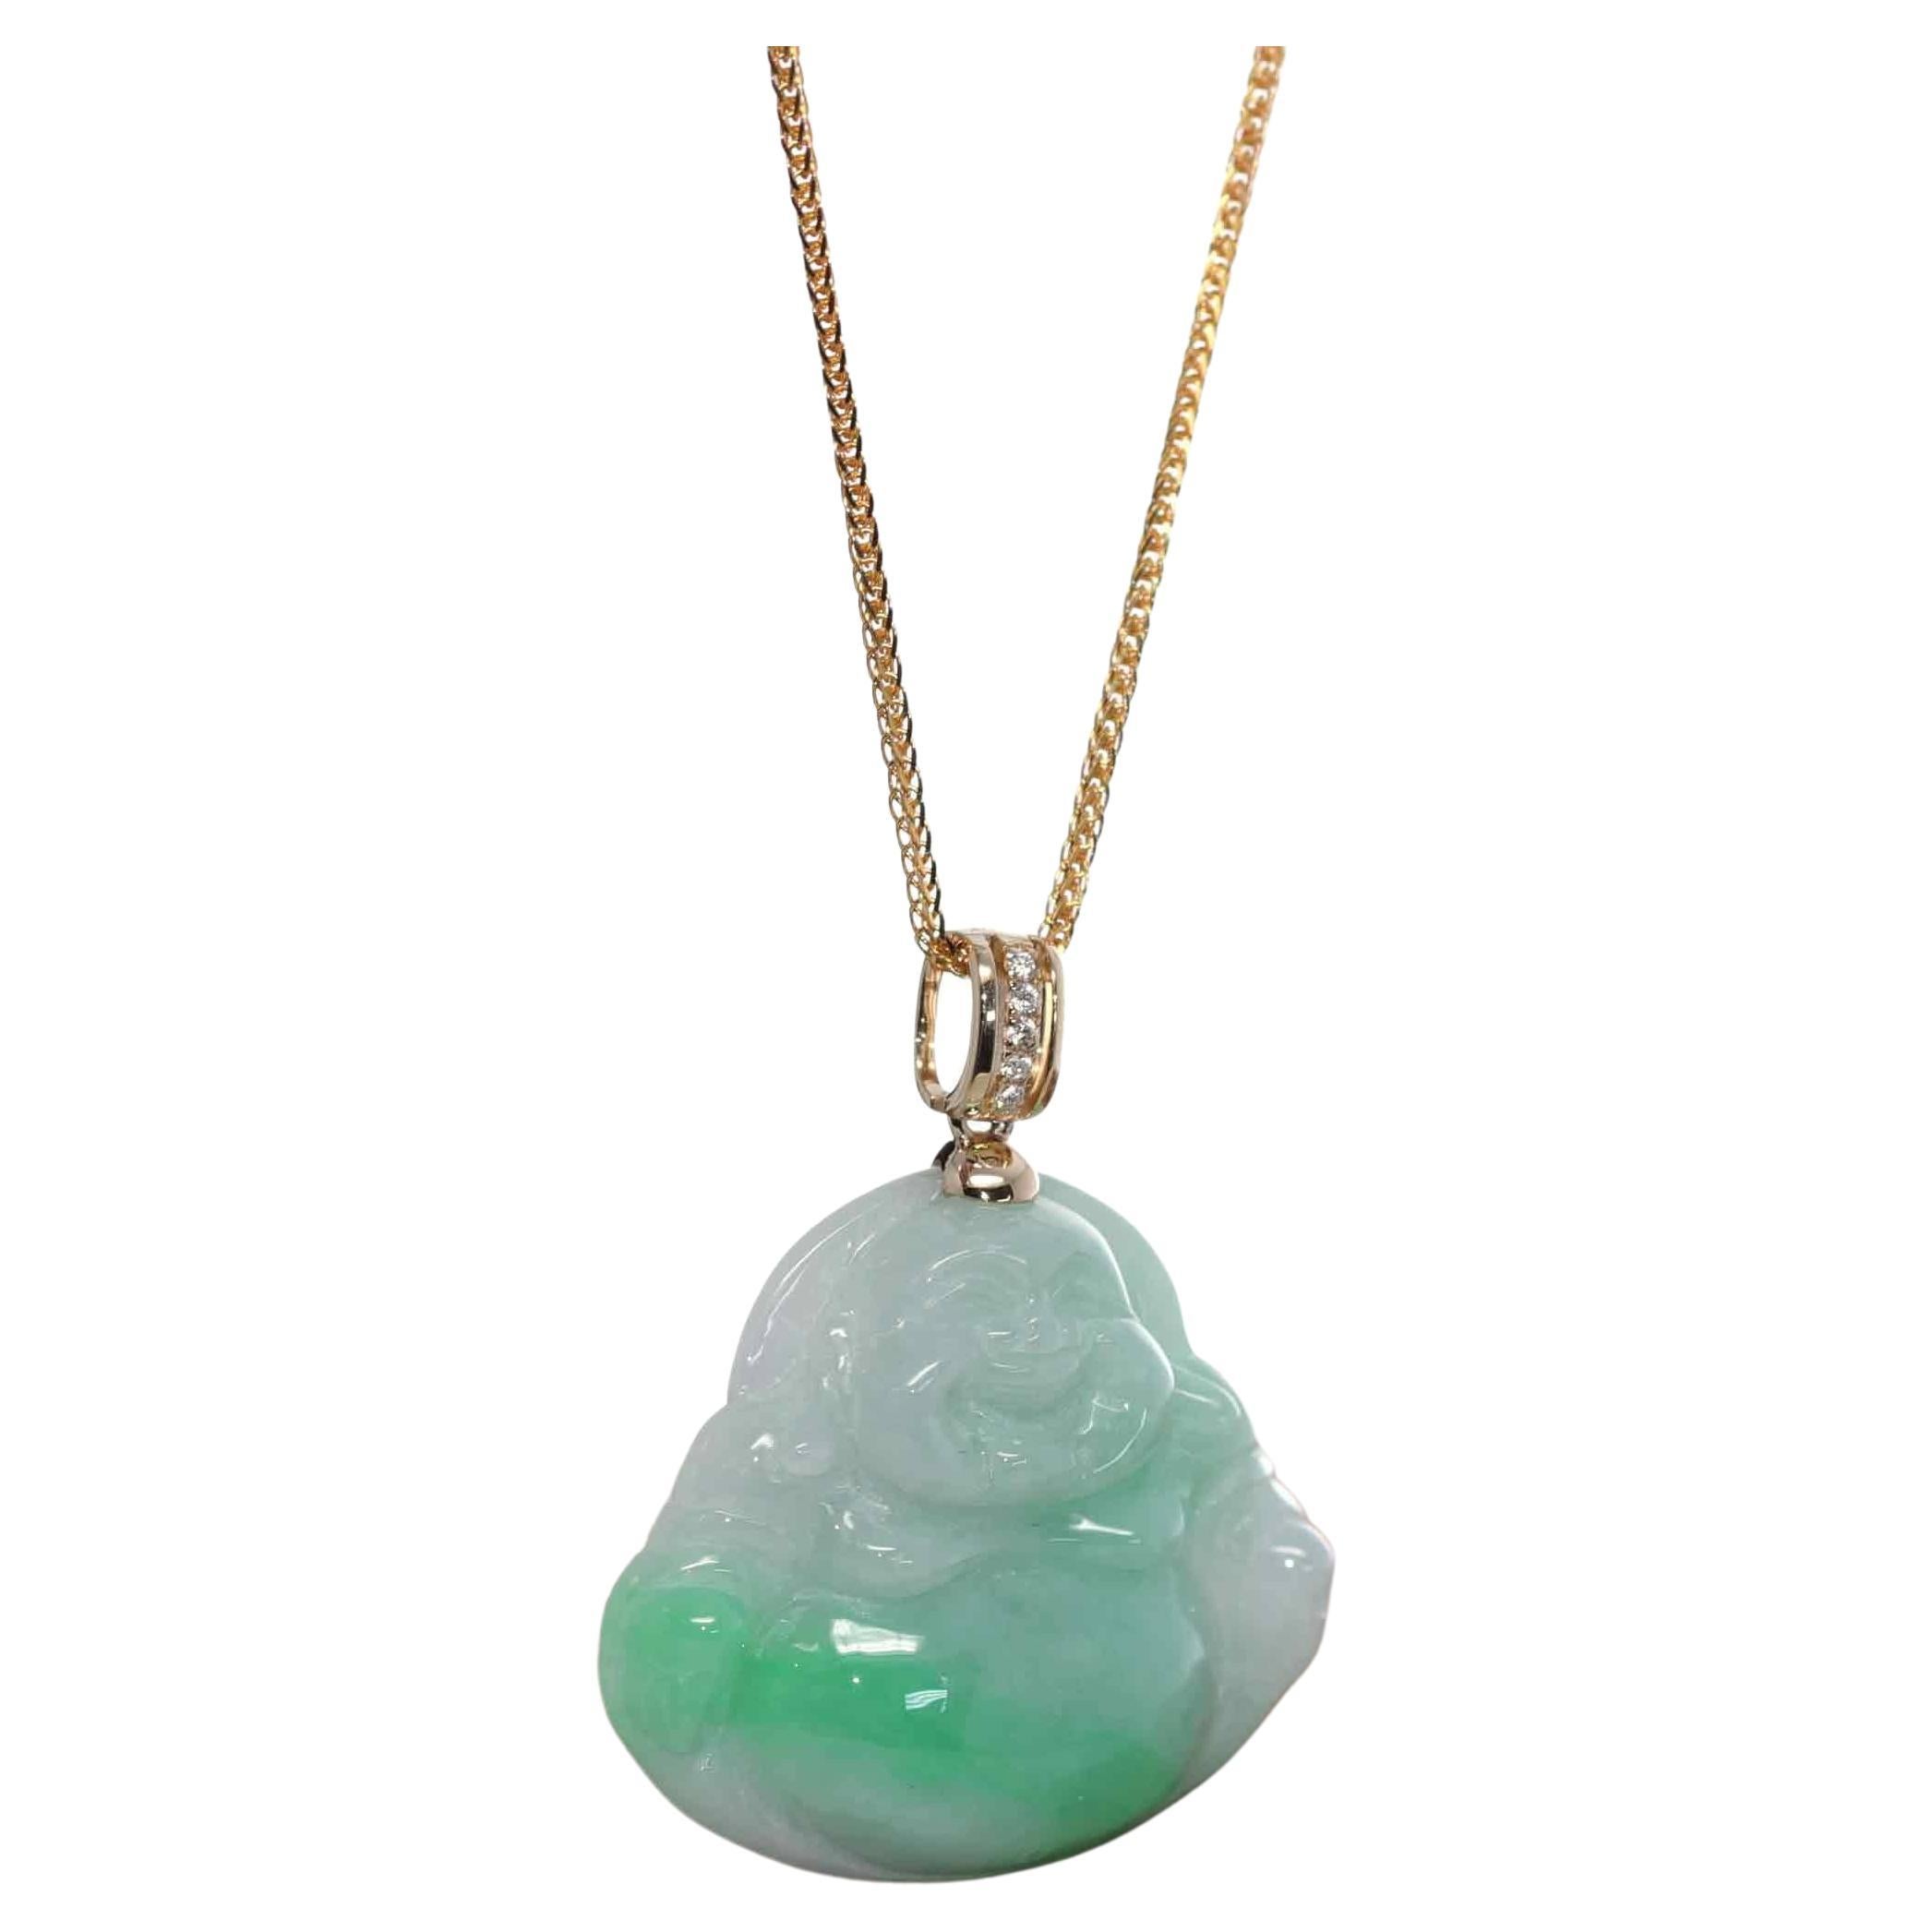 "Laughing Buddha" Green Jadeite Jade Necklace with 14k Yellow Gold Diamond Bail For Sale